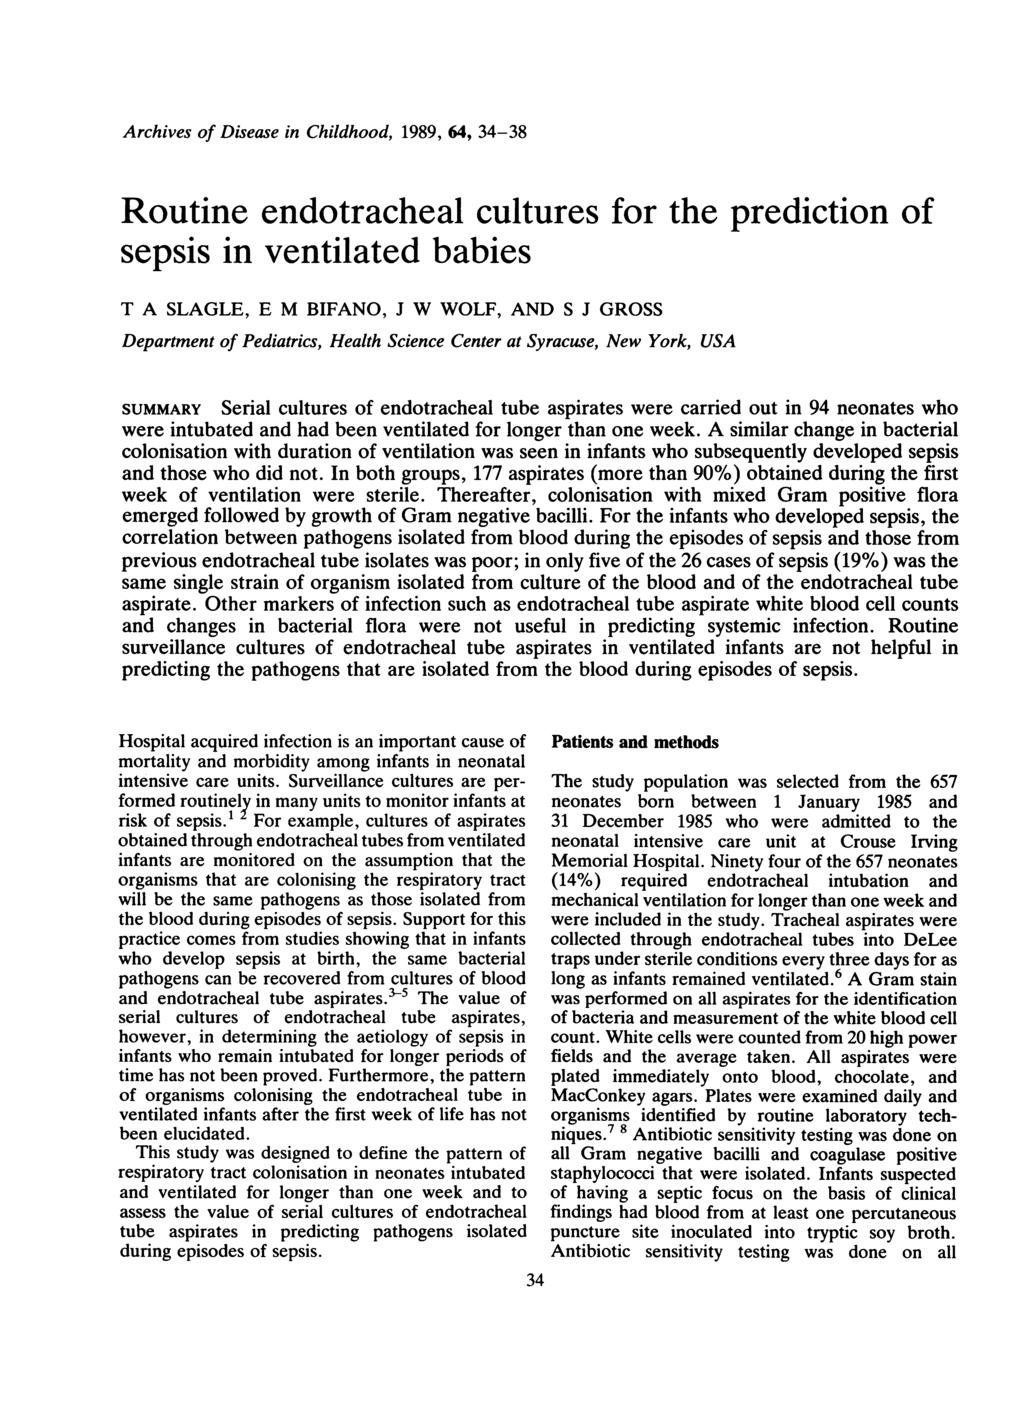 Archives of Disease in Childhood, 1989, 64, 34-38 Routine endotracheal cultures for the prediction of sepsis in ventilated babies T A SLAGLE, E M BIFANO, J W WOLF, AND S J GROSS Department of